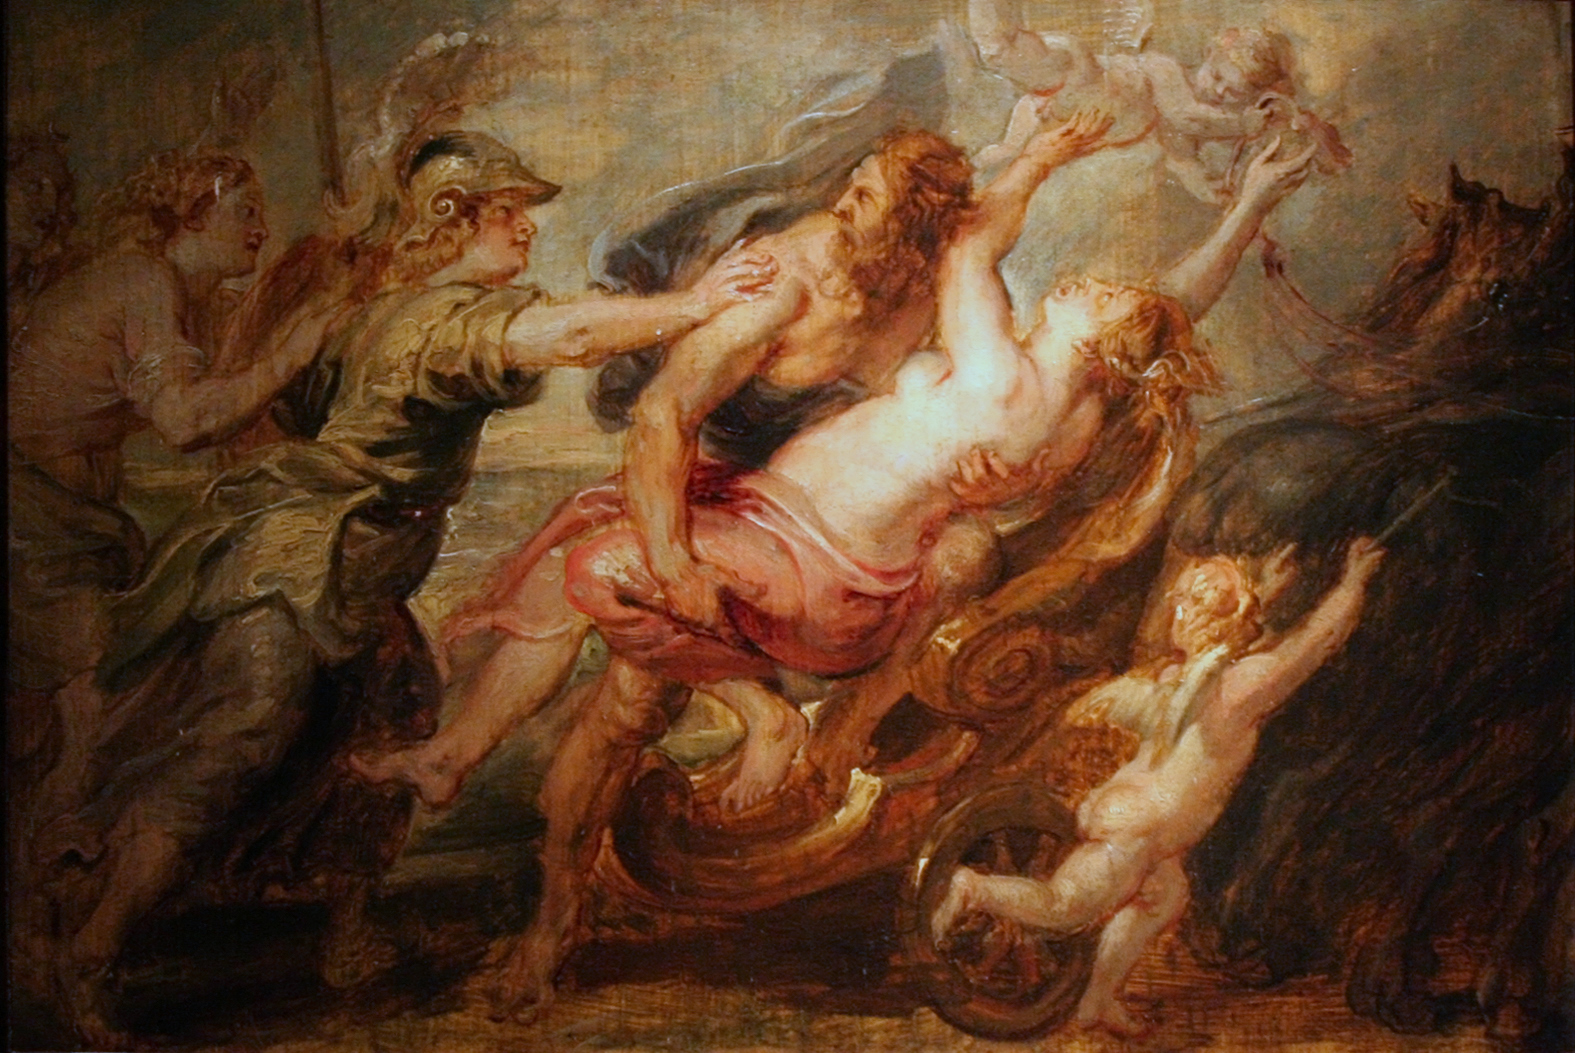 An image of the abduction of Persephone.